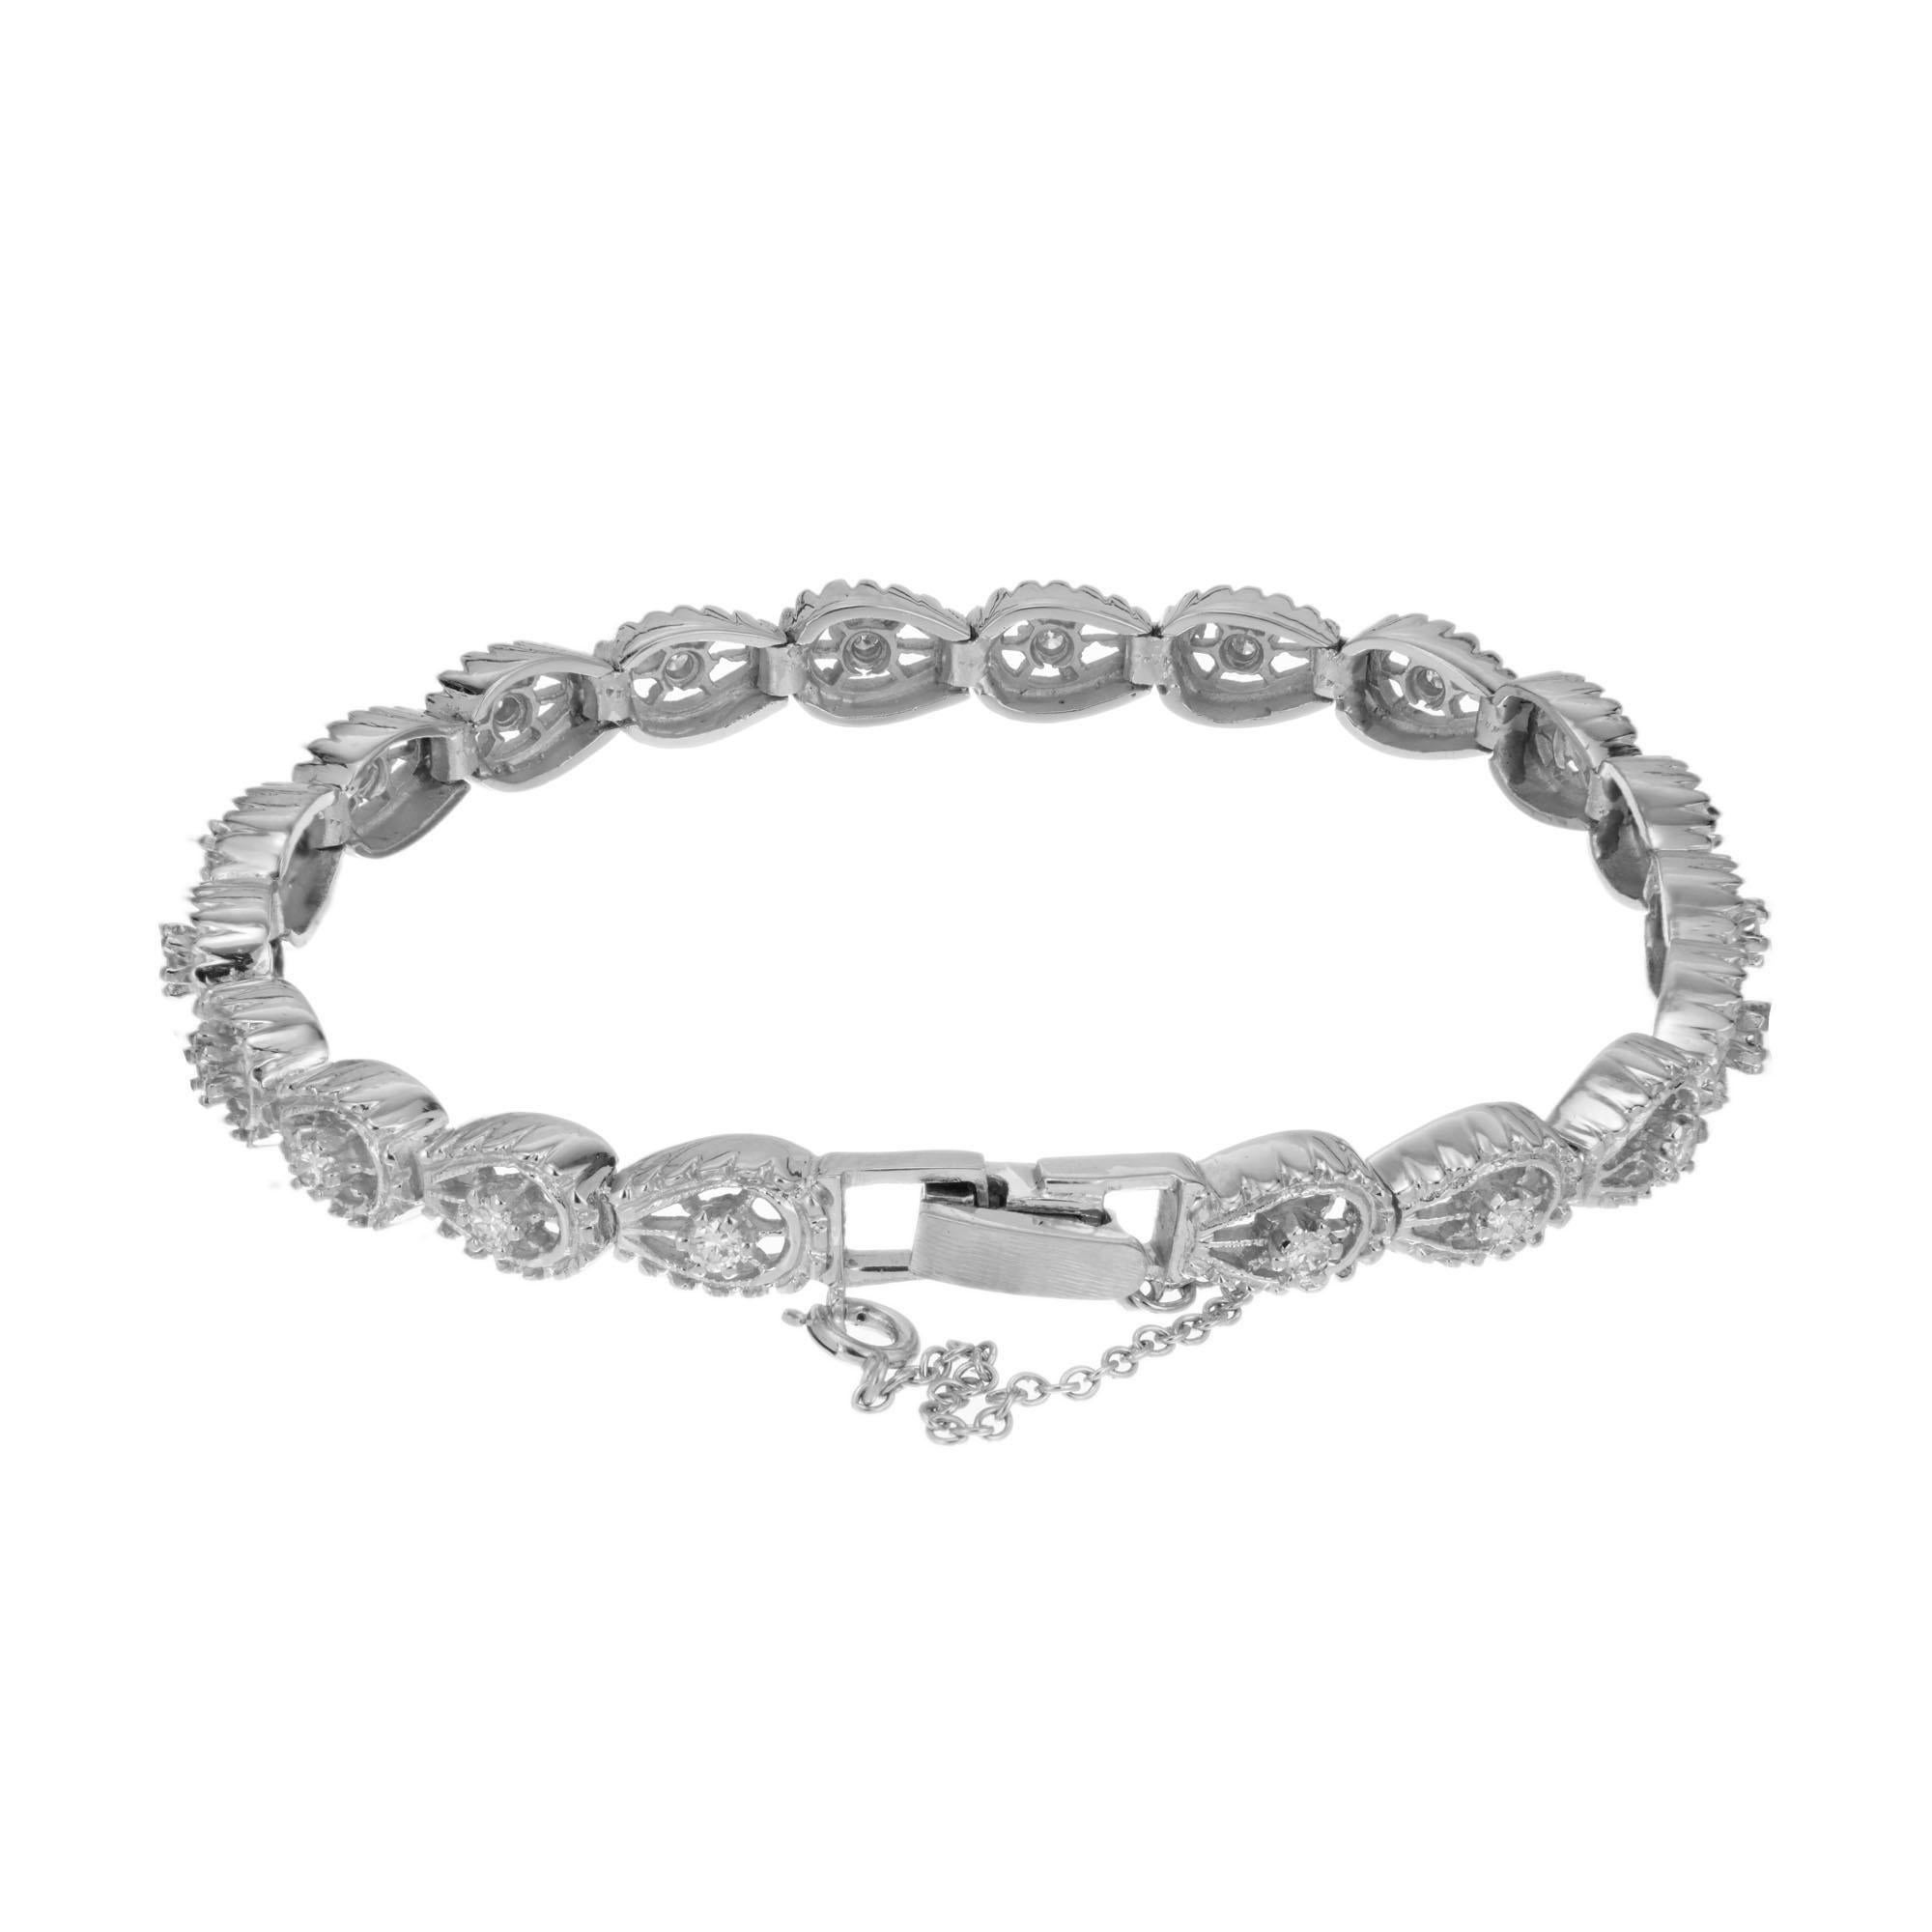 20 Horseshoe shaped links in 14k white gold each set with a bright white diamonds. Safety chain attached. 7 inches in length. 

20 round brilliant cut diamonds, G-H VS approx. .60cts
14k white gold 
Stamped: 14k
17.2 grams
Bracelet: 7 Inch
Width: